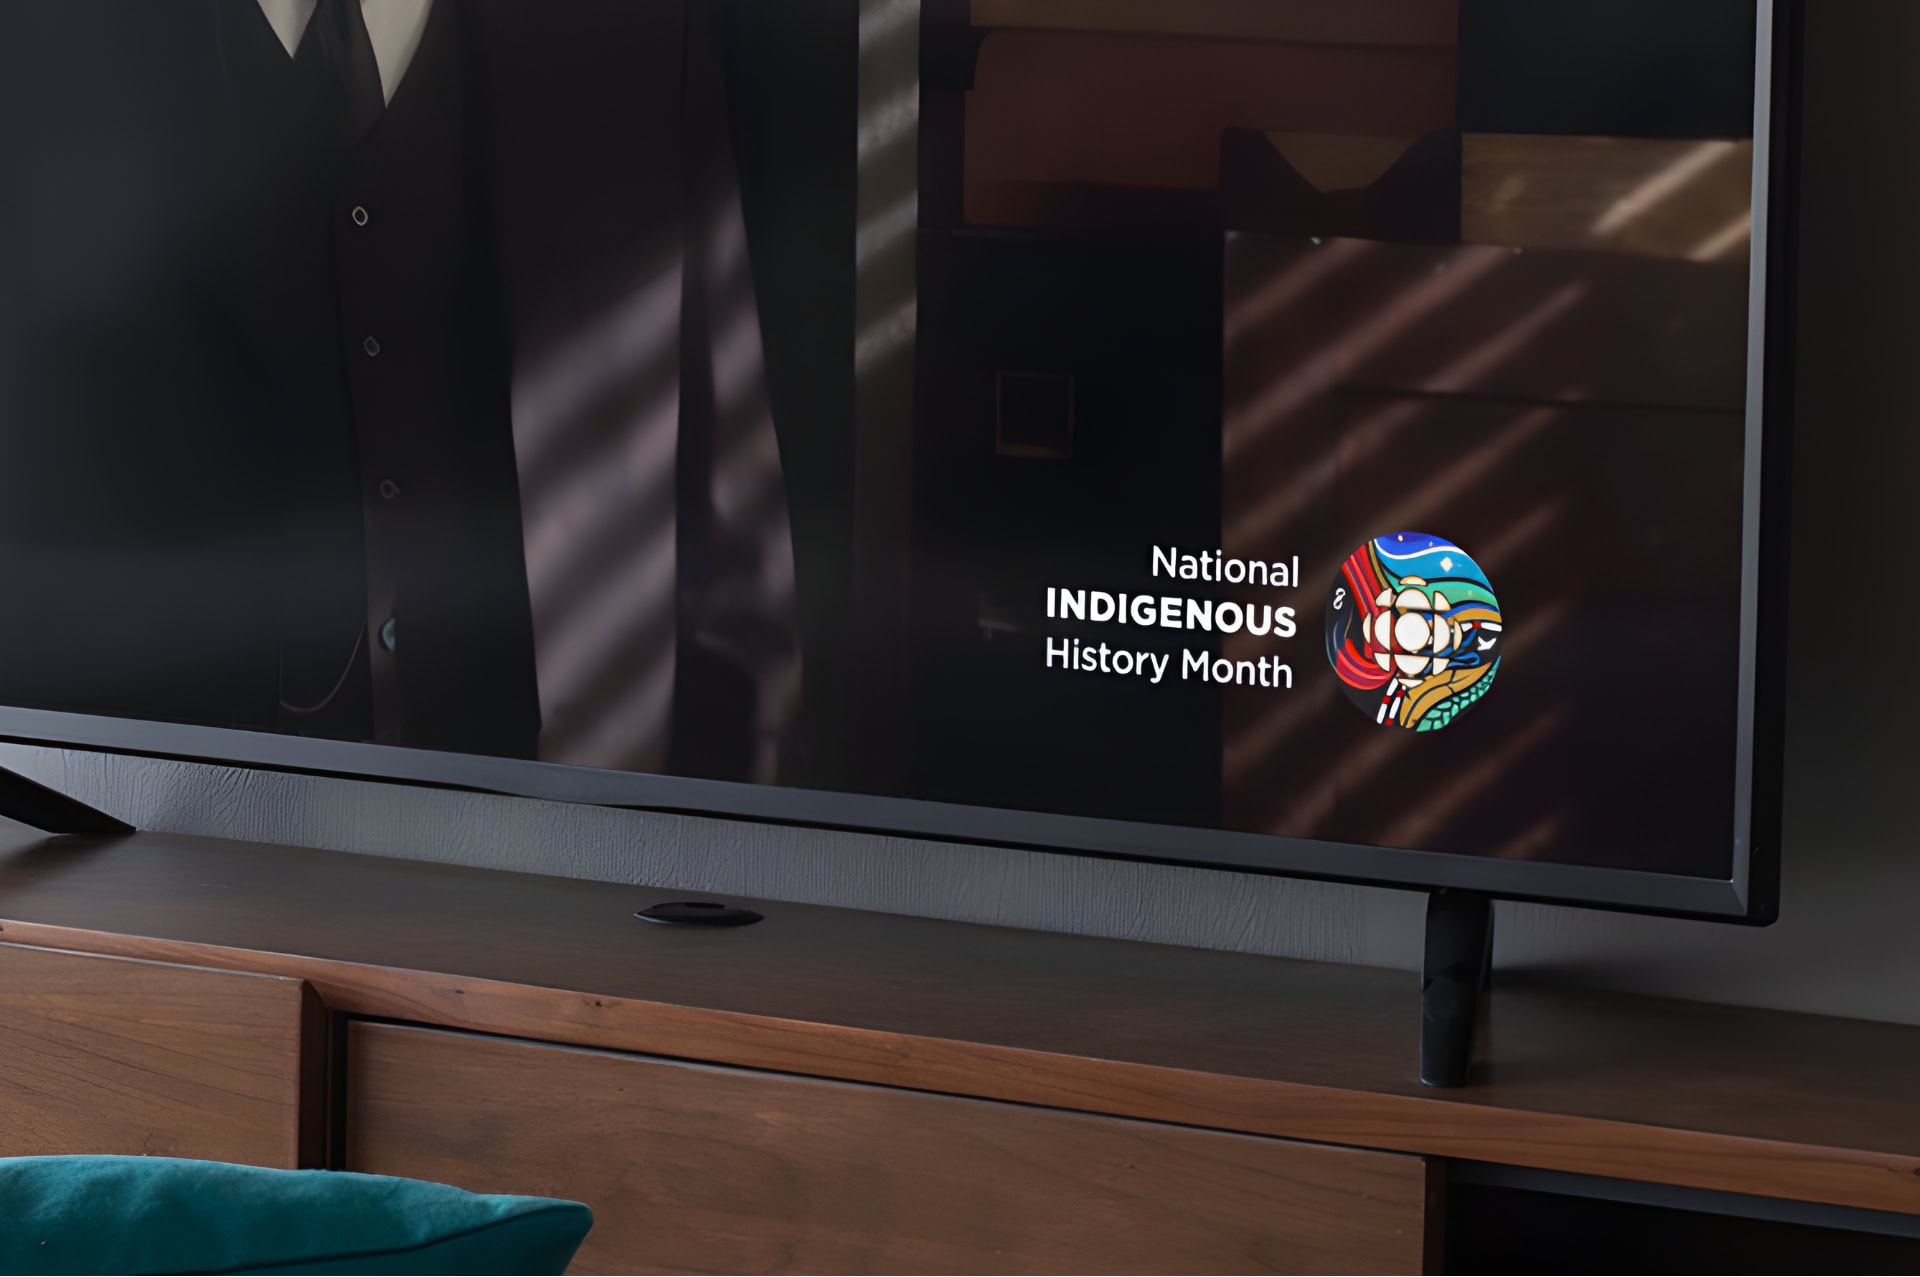 A TV screen displays the words 'National Indigenous History Month' alongside the logo DDP created for CBC